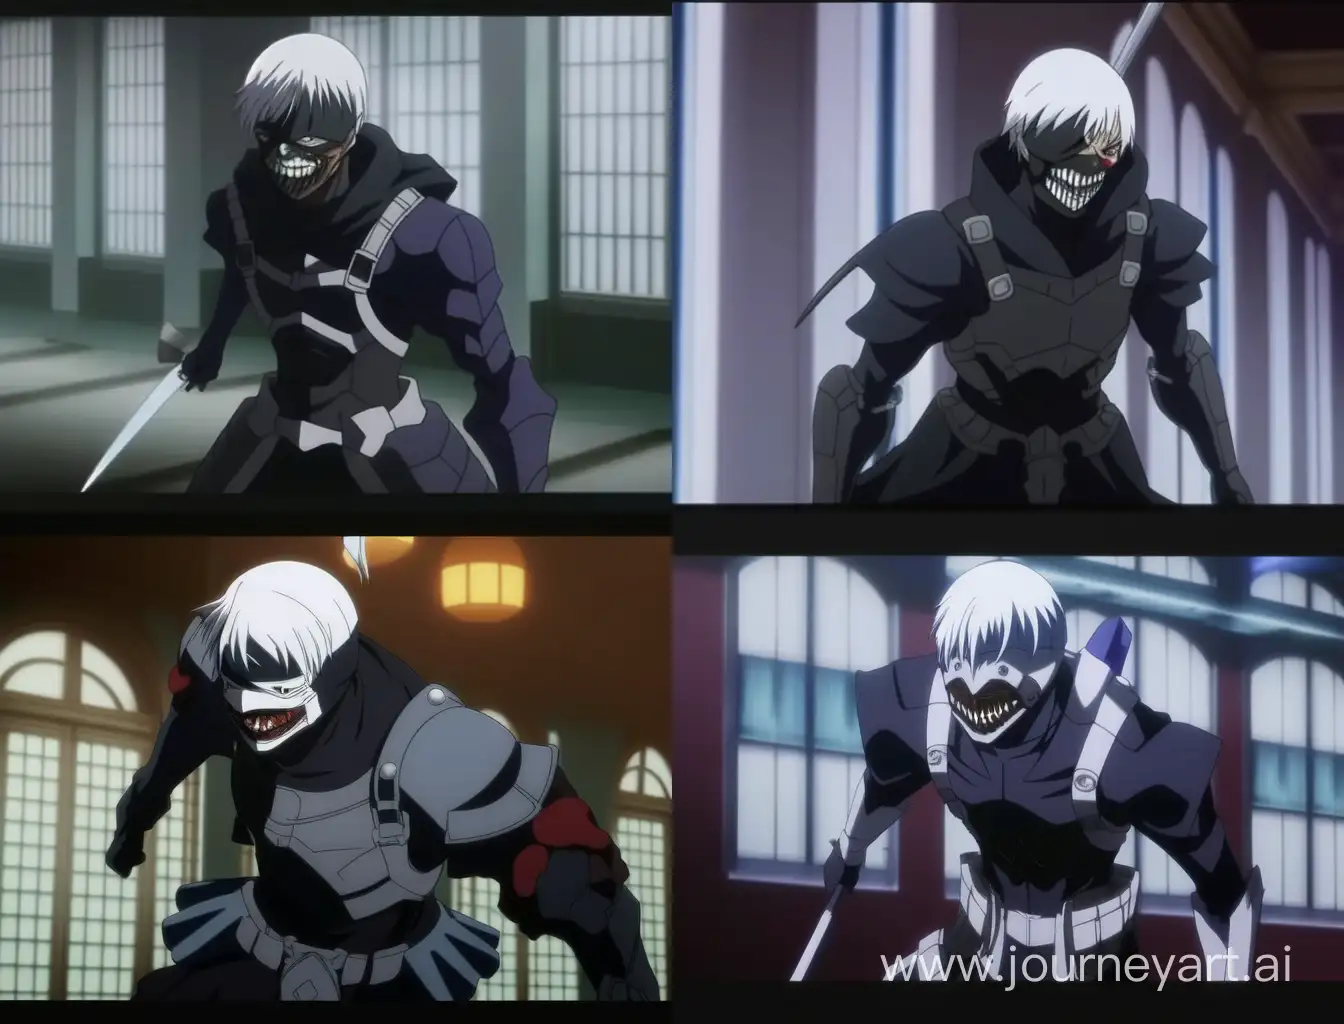 Manga-Style-Fight-Scene-with-Character-in-Dark-Armor-and-White-Mask